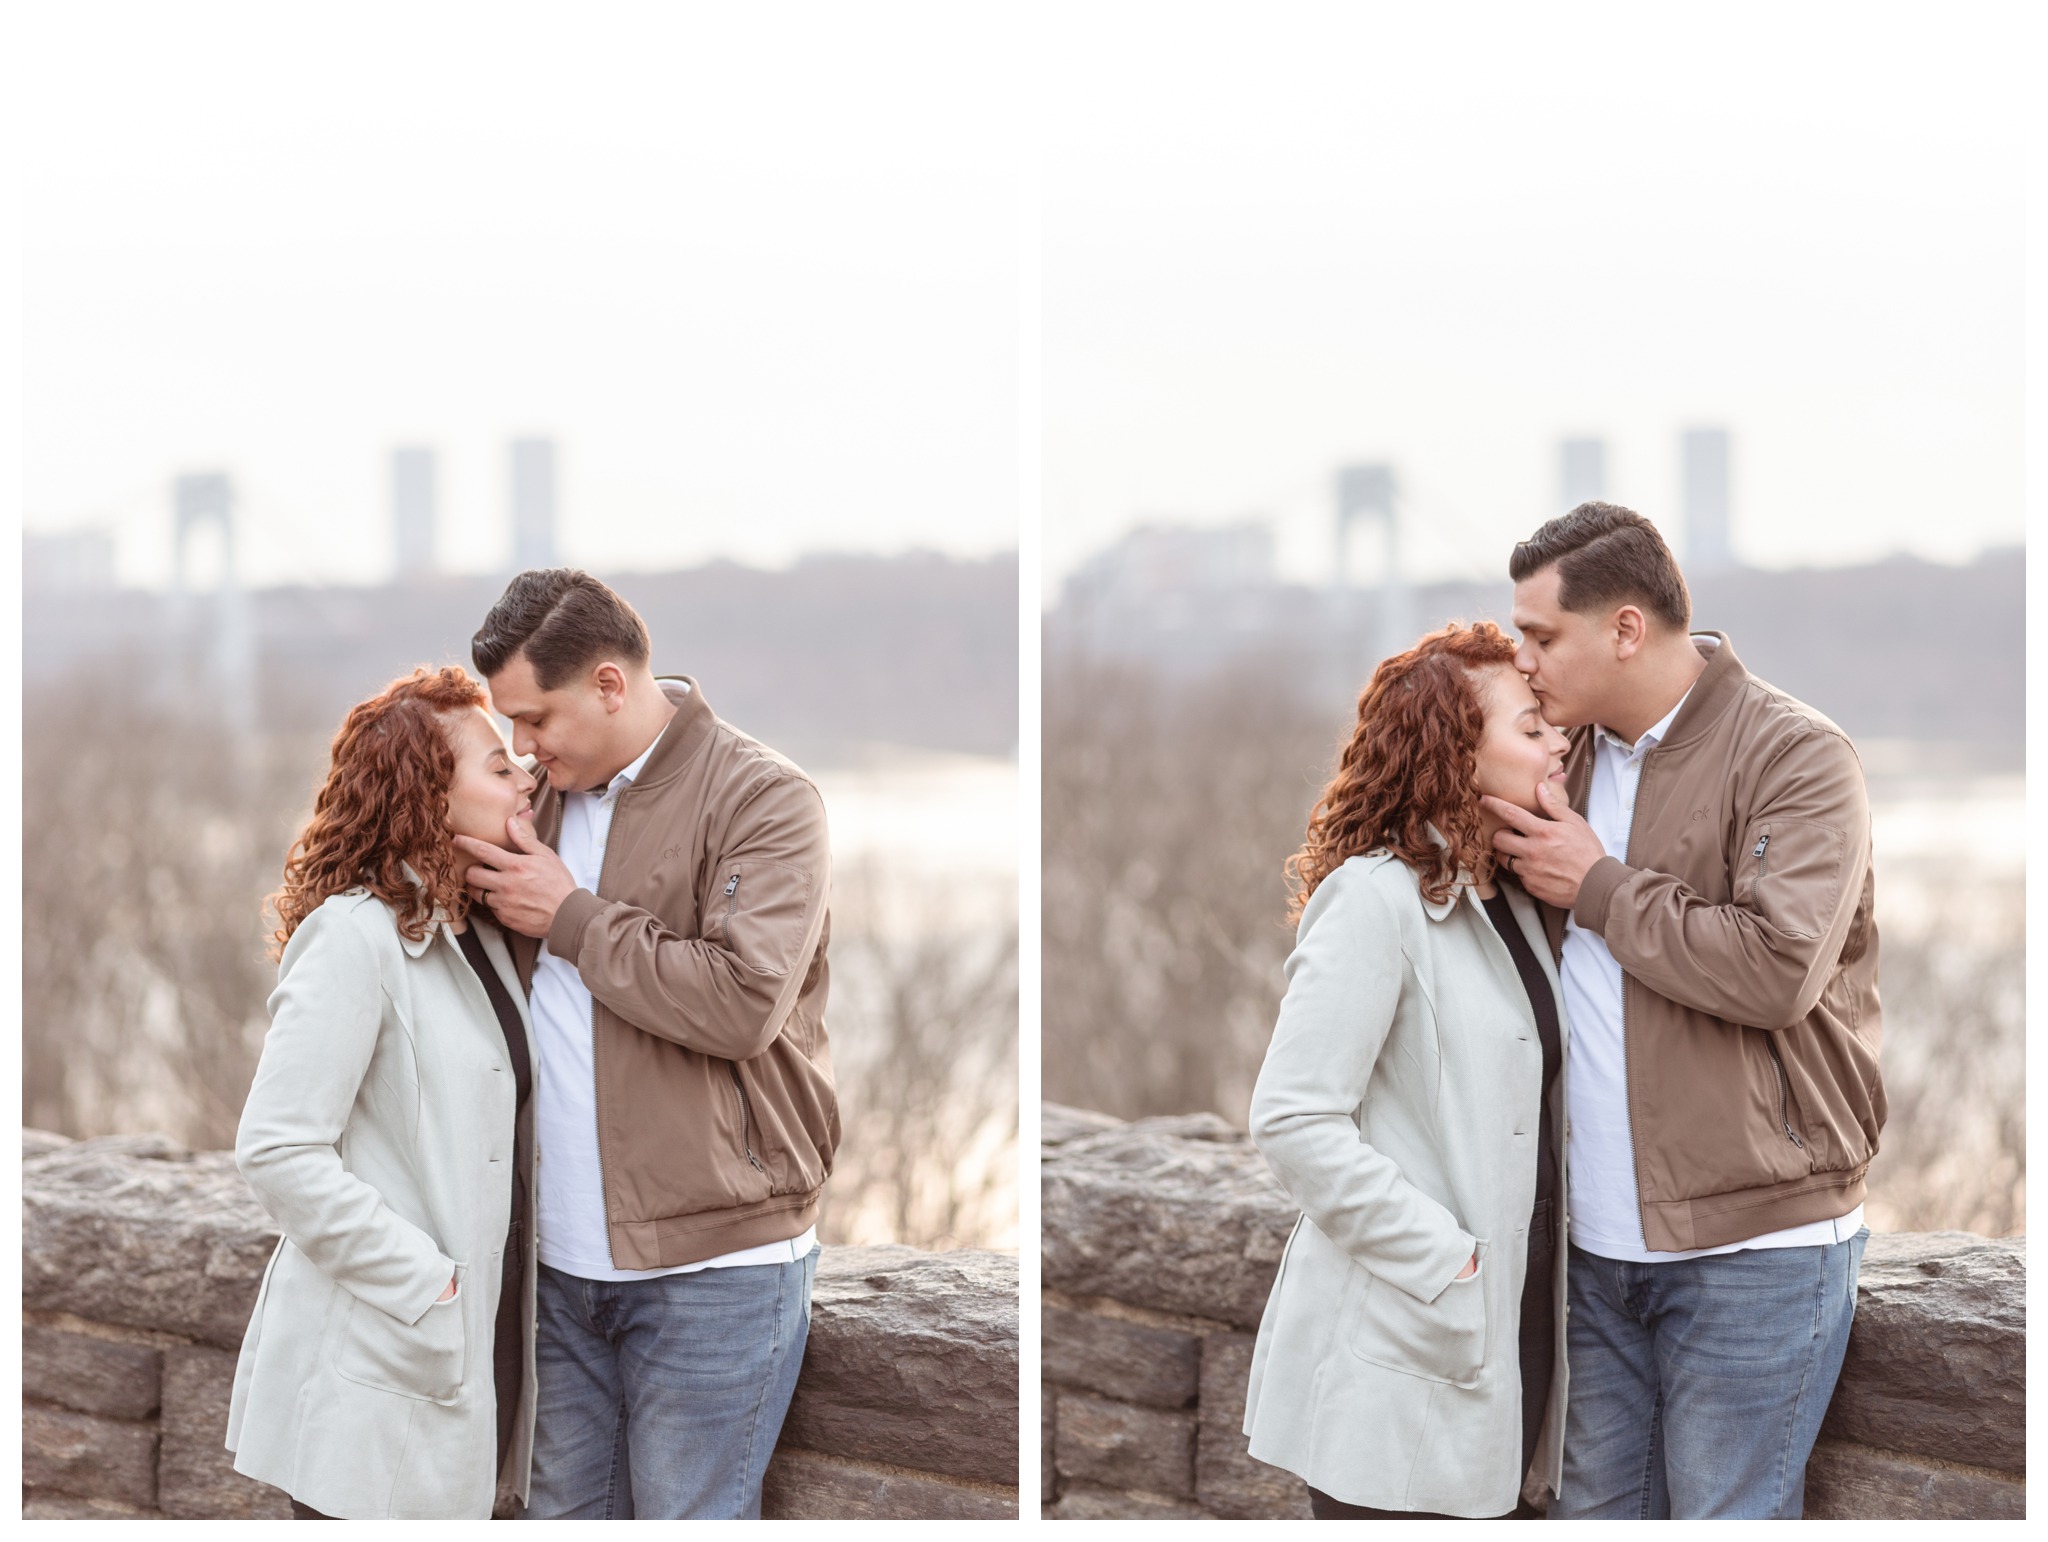 fort tryon park engagement session at the hudson river lookout with george washington bridge skyline